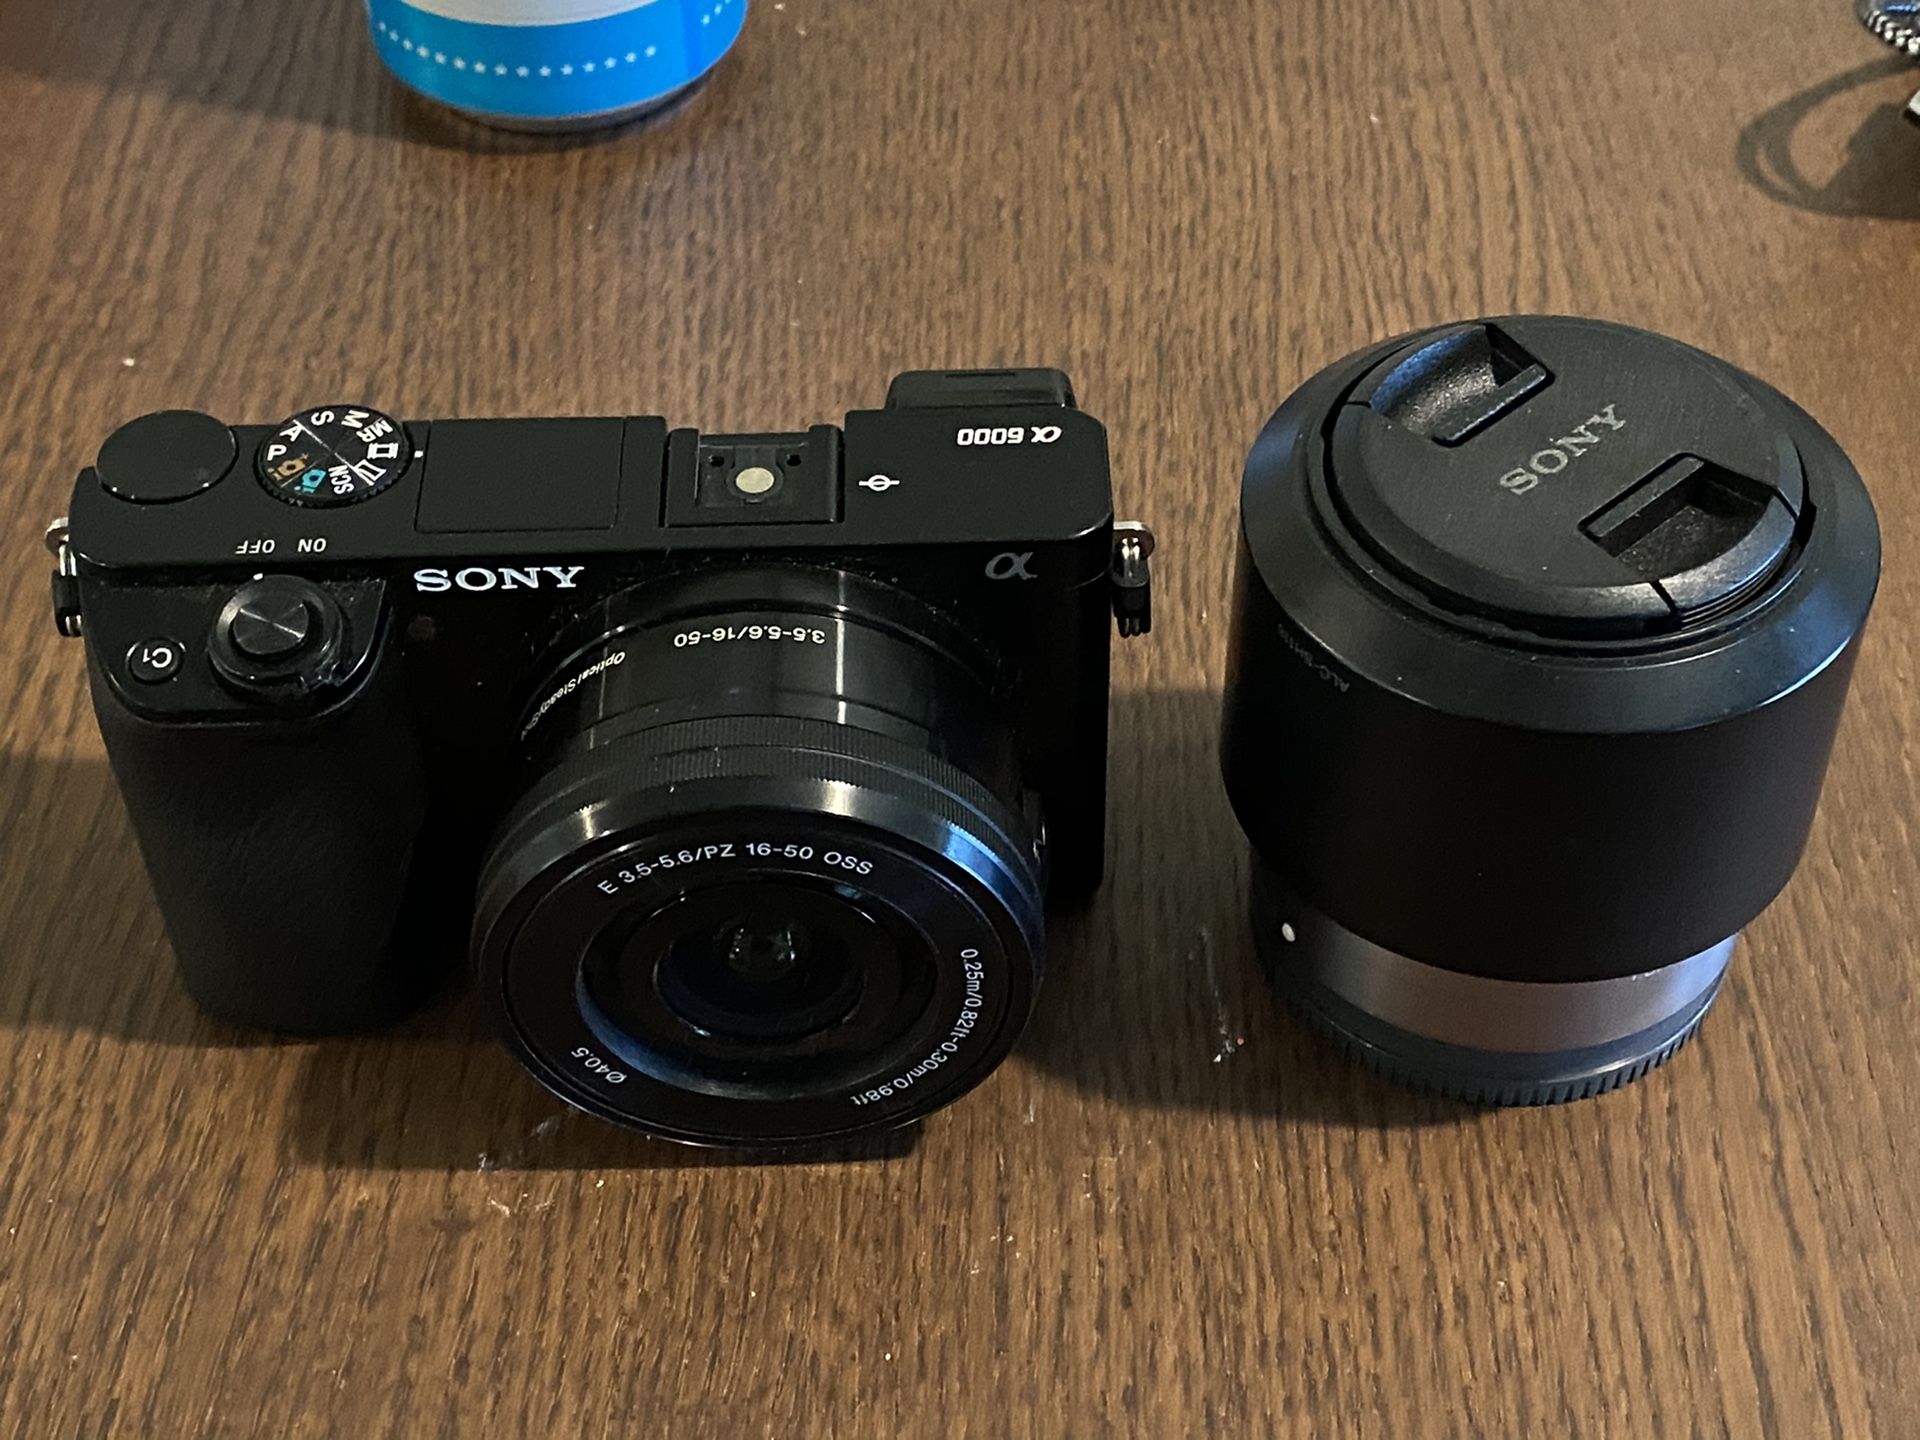 Sony A6000 digital camera with 16-50mm and 50mm f/1.8 lenses